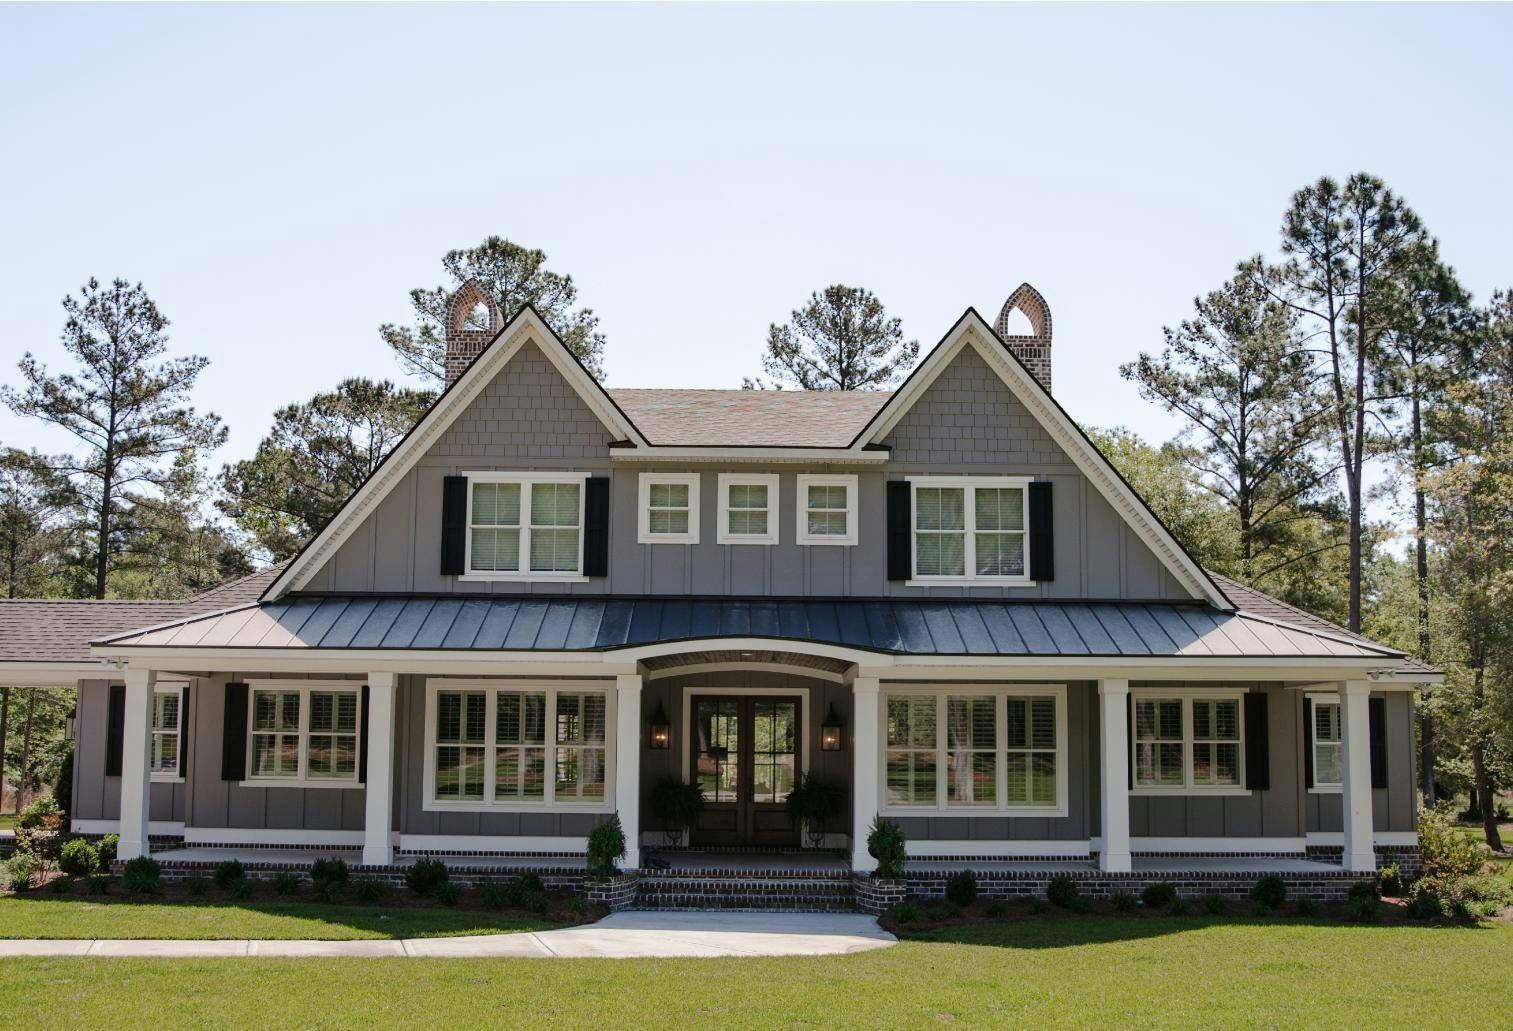 Home With Architectural Asphalt Shingles & Standing Seam Metal Roofing | Mixed Material Roofing | Bulloch County Residential Roofing | Statesboro Residential Roofers